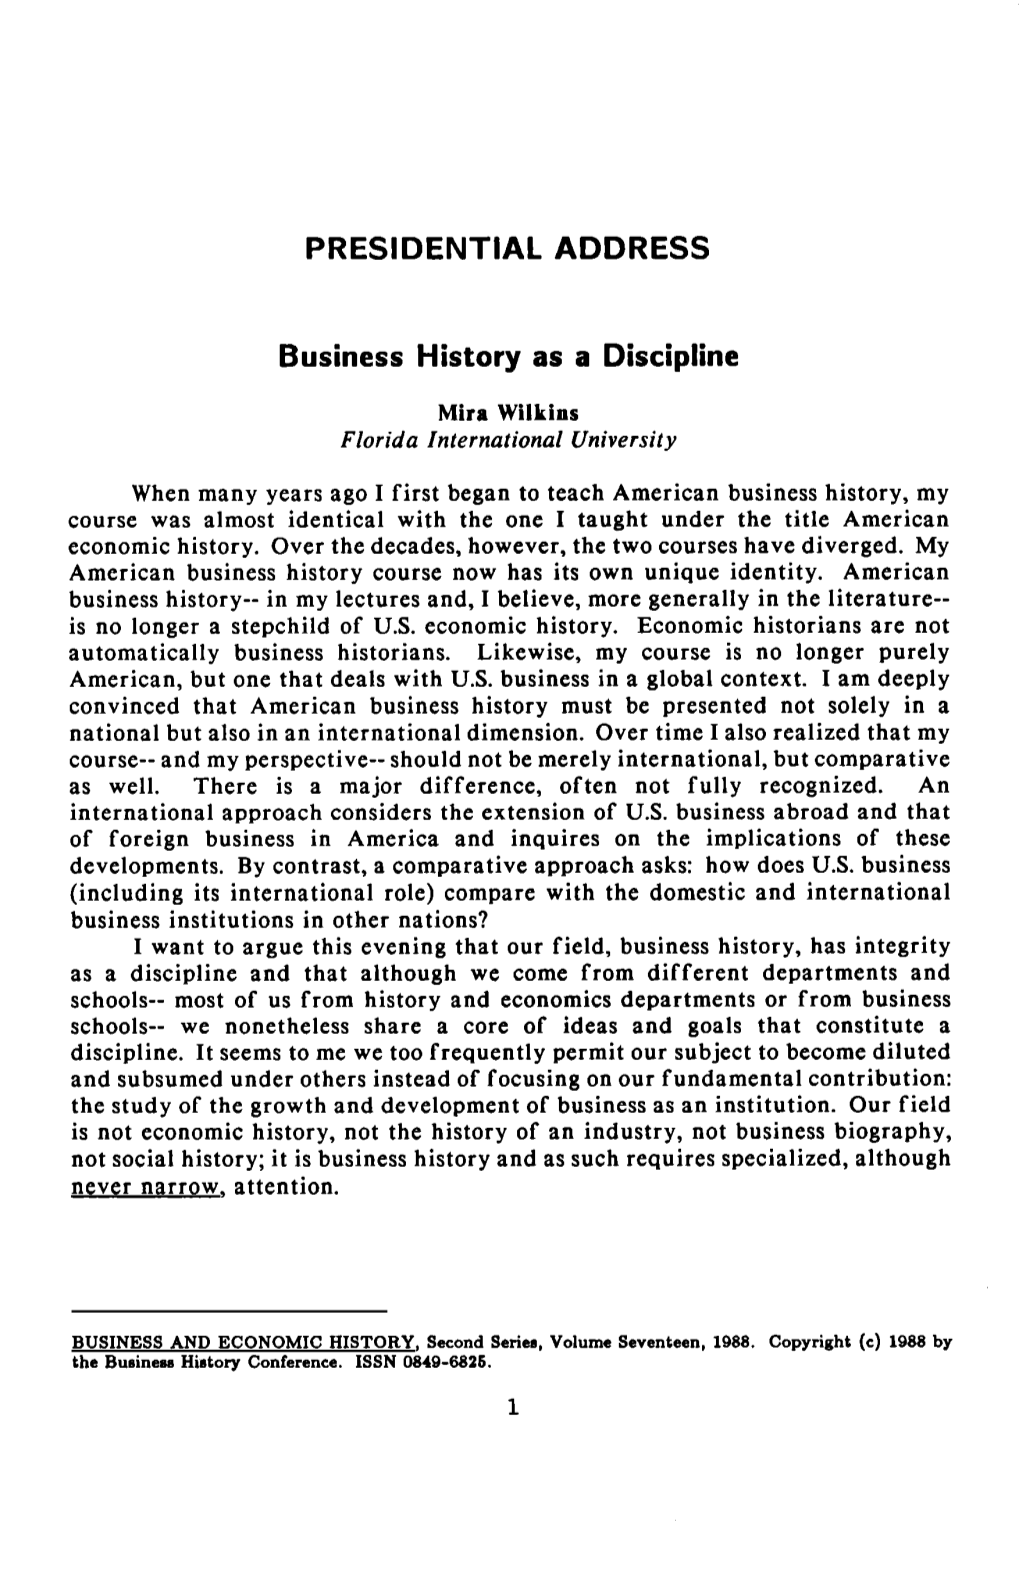 Business History As a Discipline